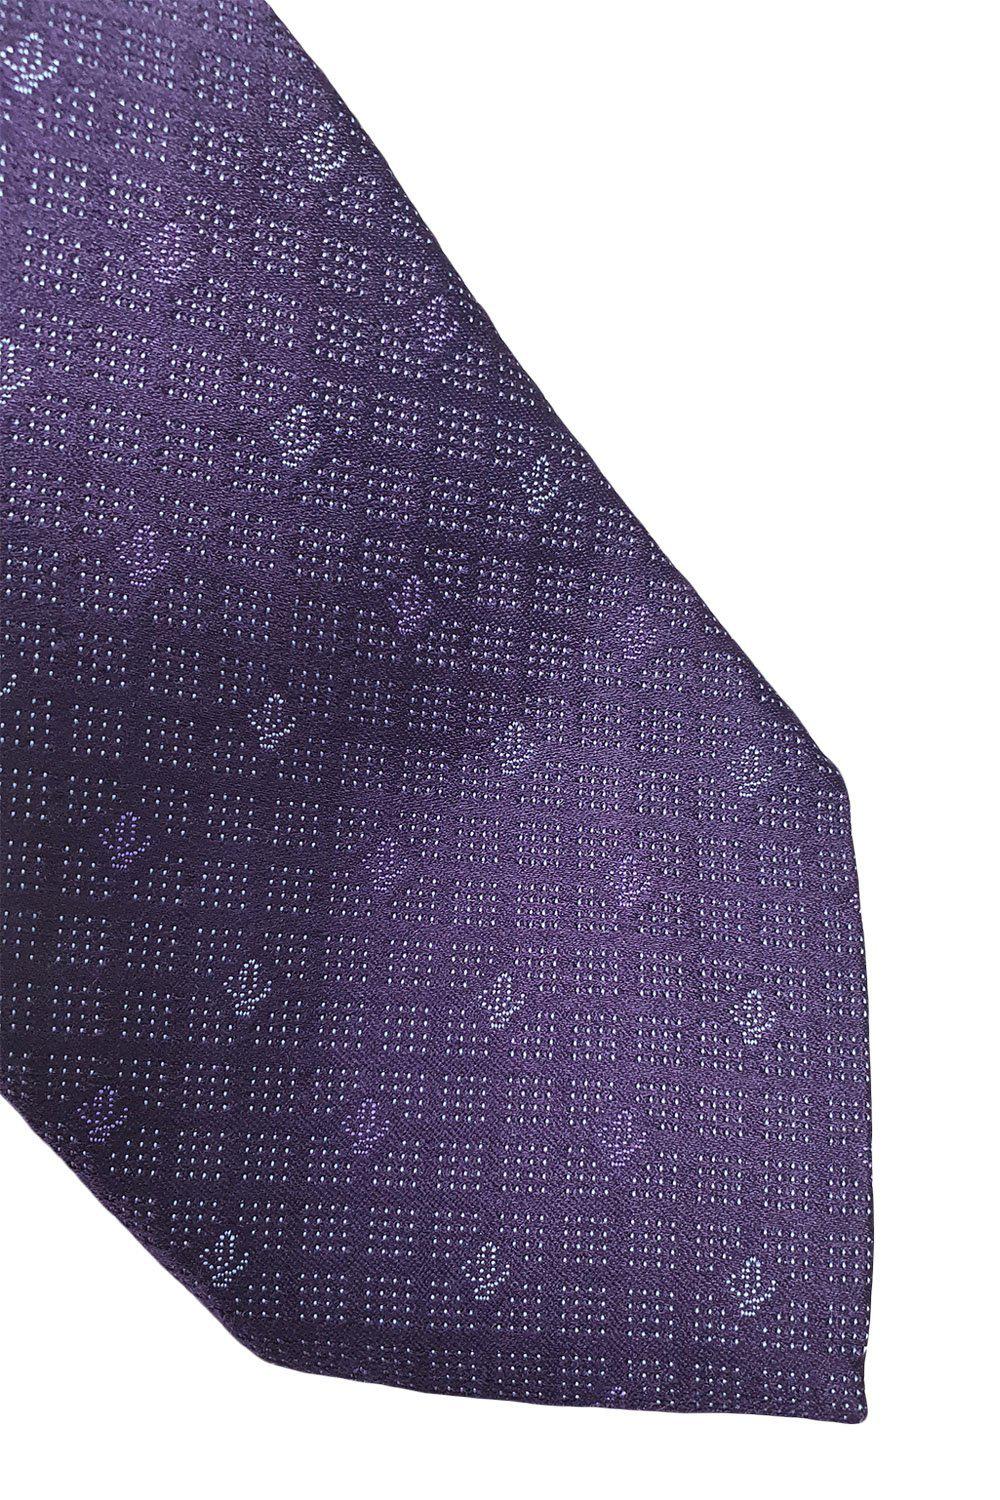 Copy of LOEWE 100% Silk Purple Tie Silver Polka Dot With Logo Repeat (60" L | 3.3" W)-The Freperie